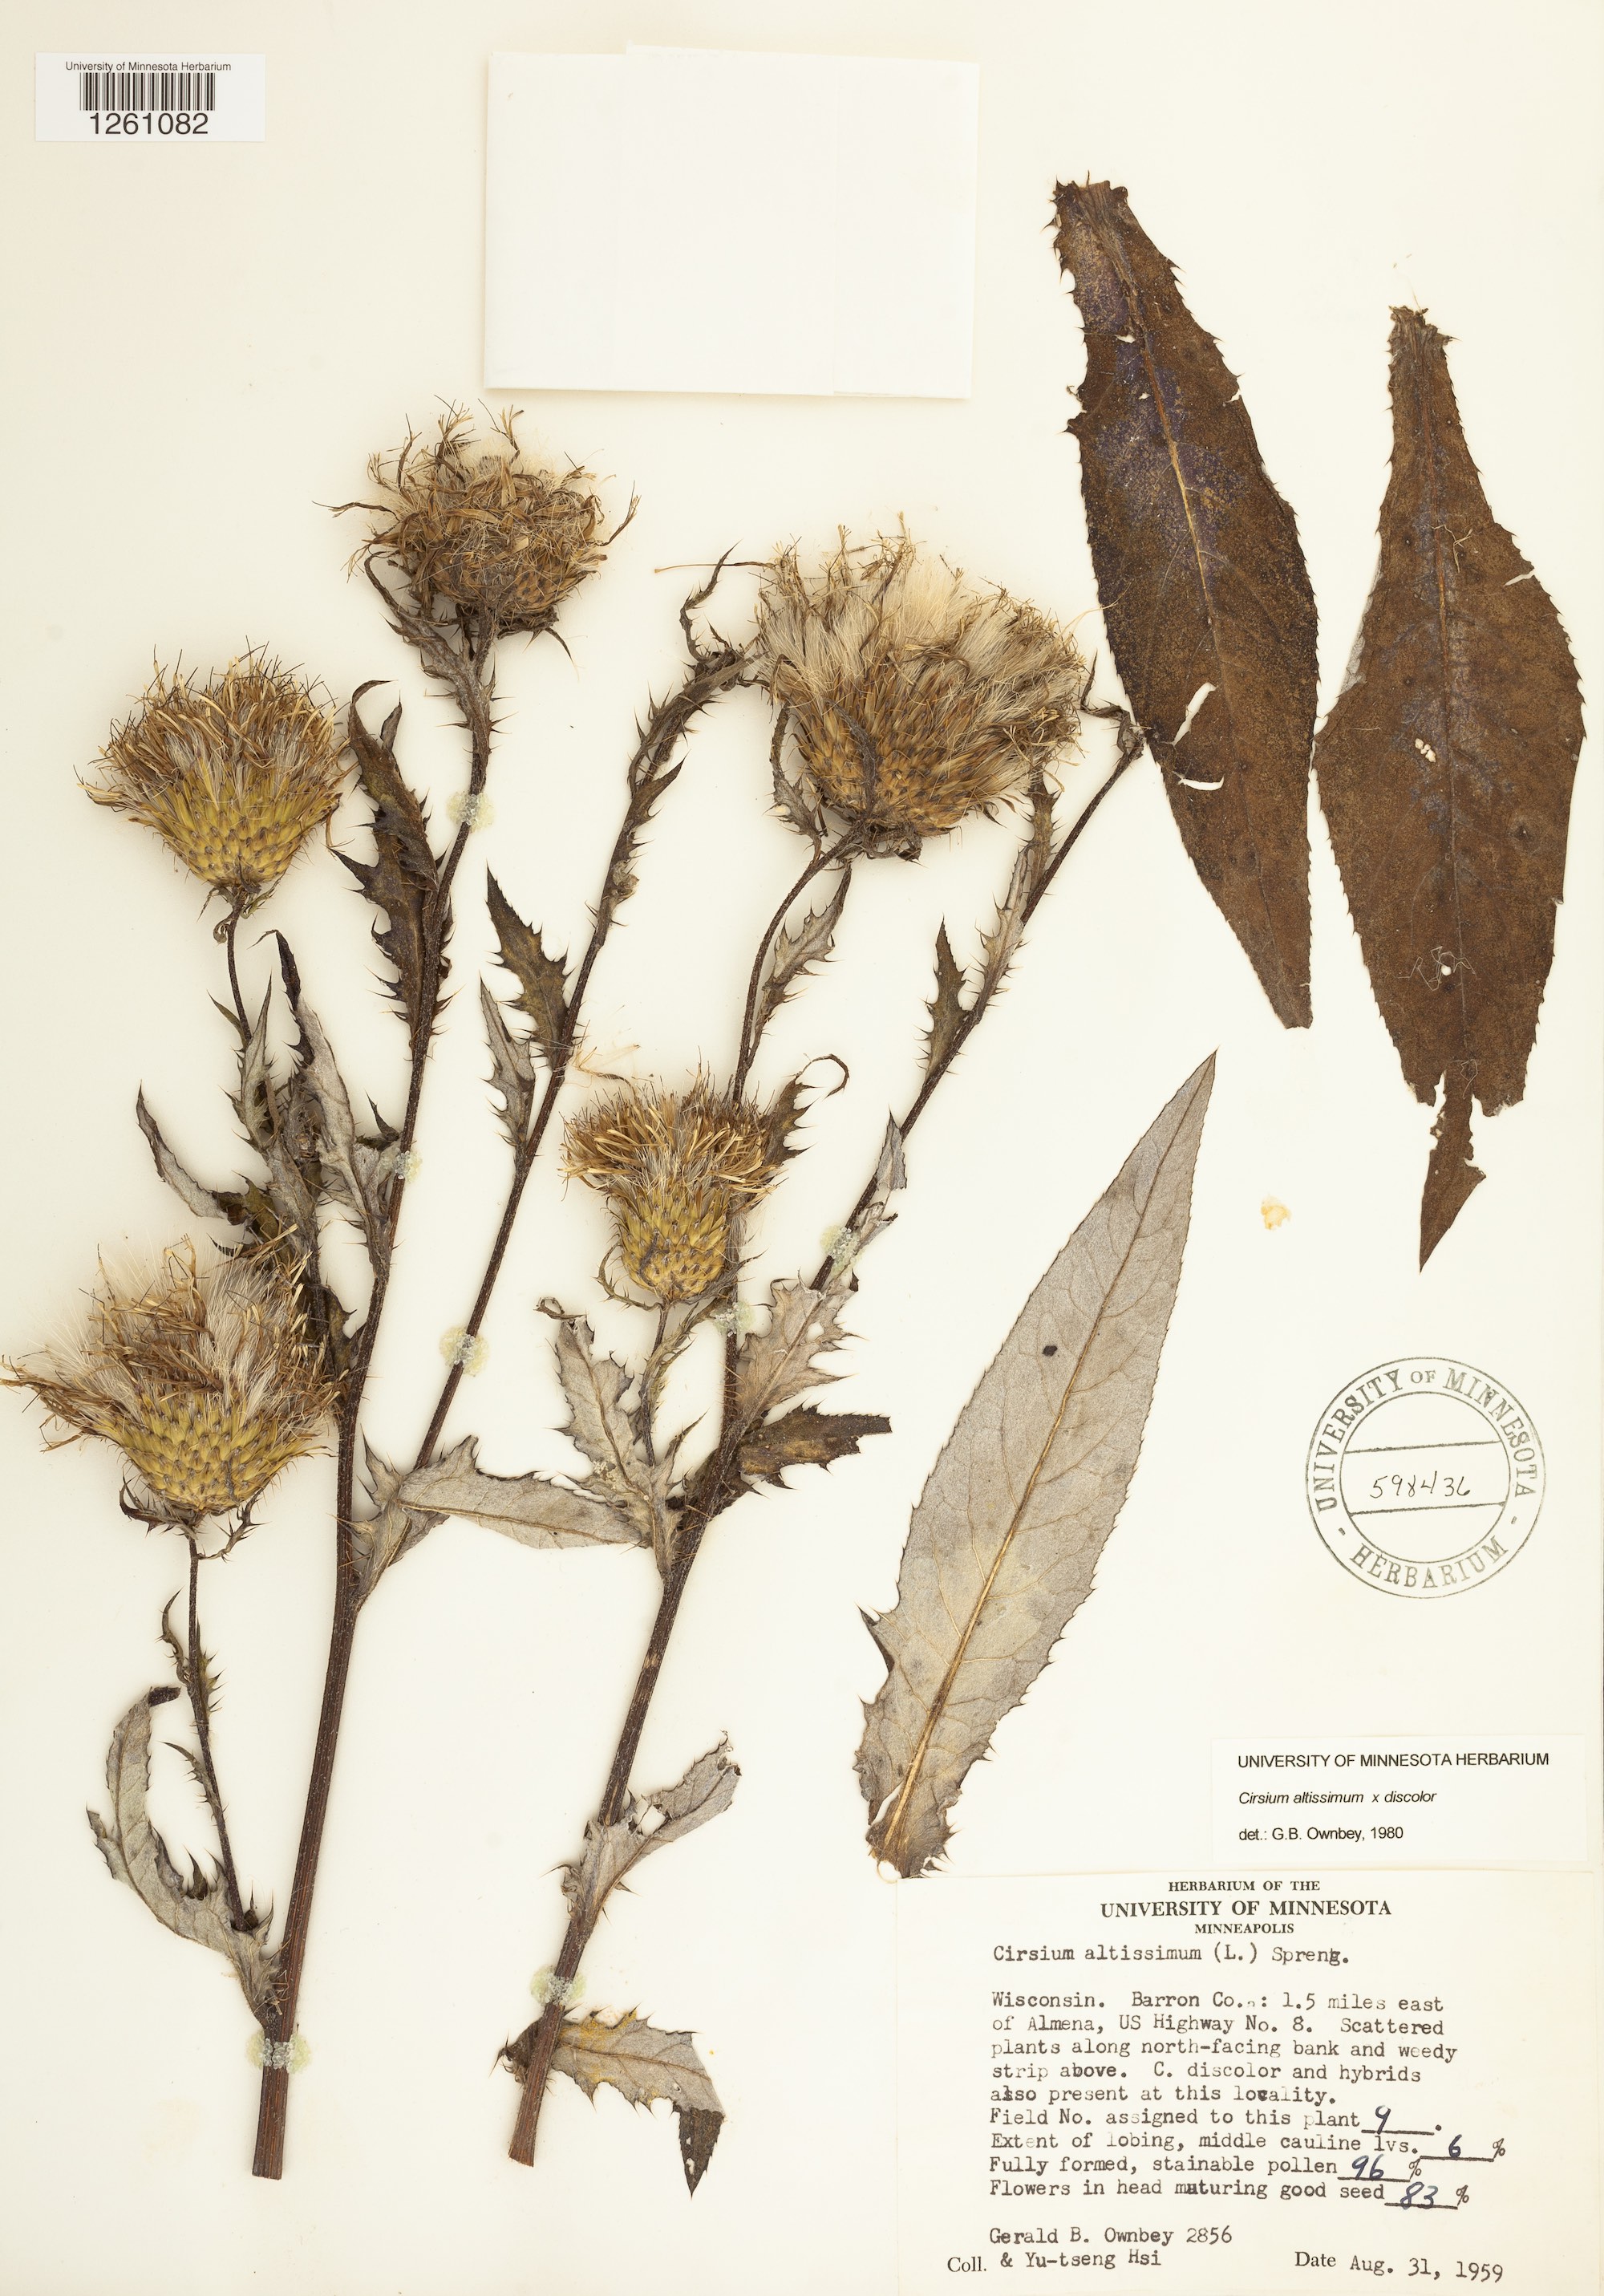 Tall Thistle specimen collected in 1959 in Barron County, Wisconsin.